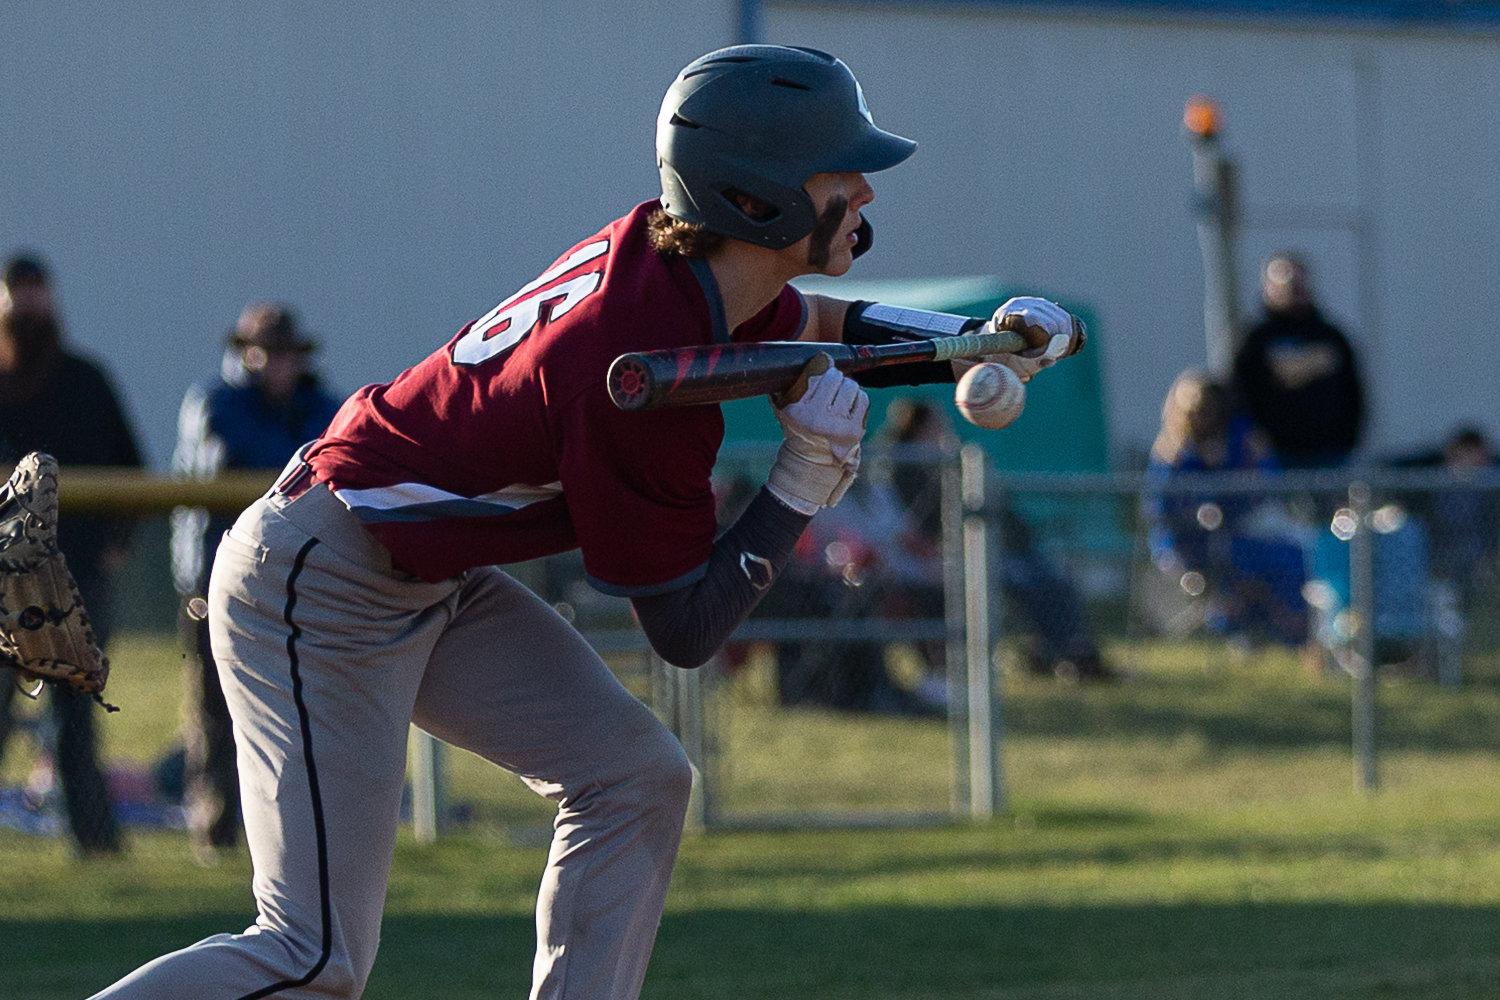 W.F. West catcher Deacon Meller takes a pitch, holding back a bunt, against Rochester at Heinz-Rotter Field March 21.